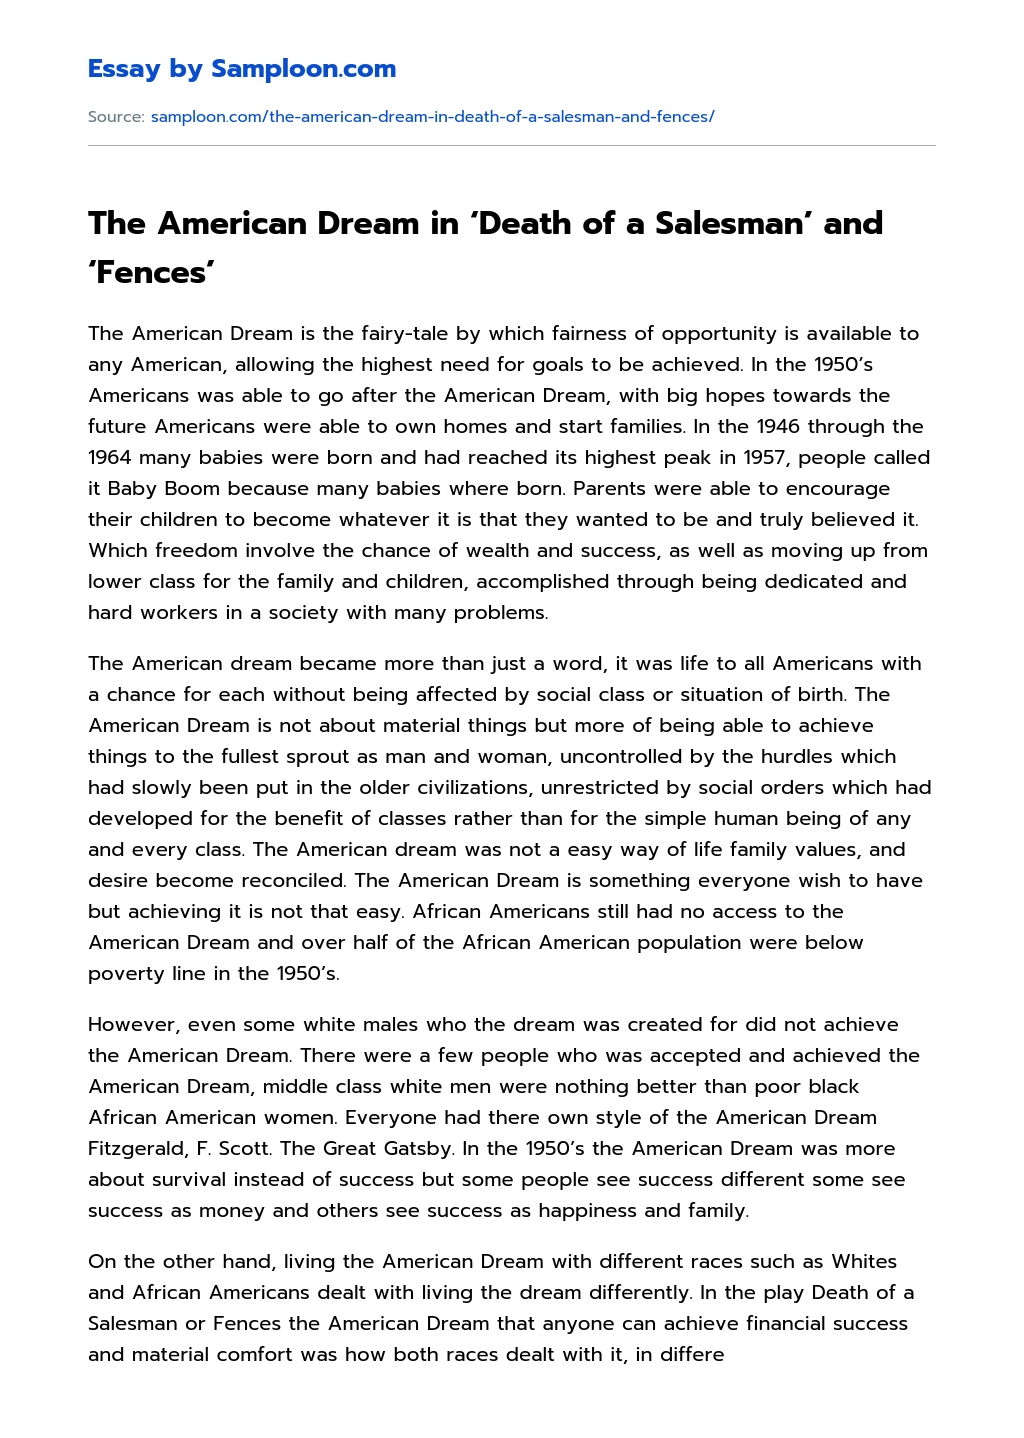 The American Dream in ‘Death of a Salesman’ and ‘Fences’ essay